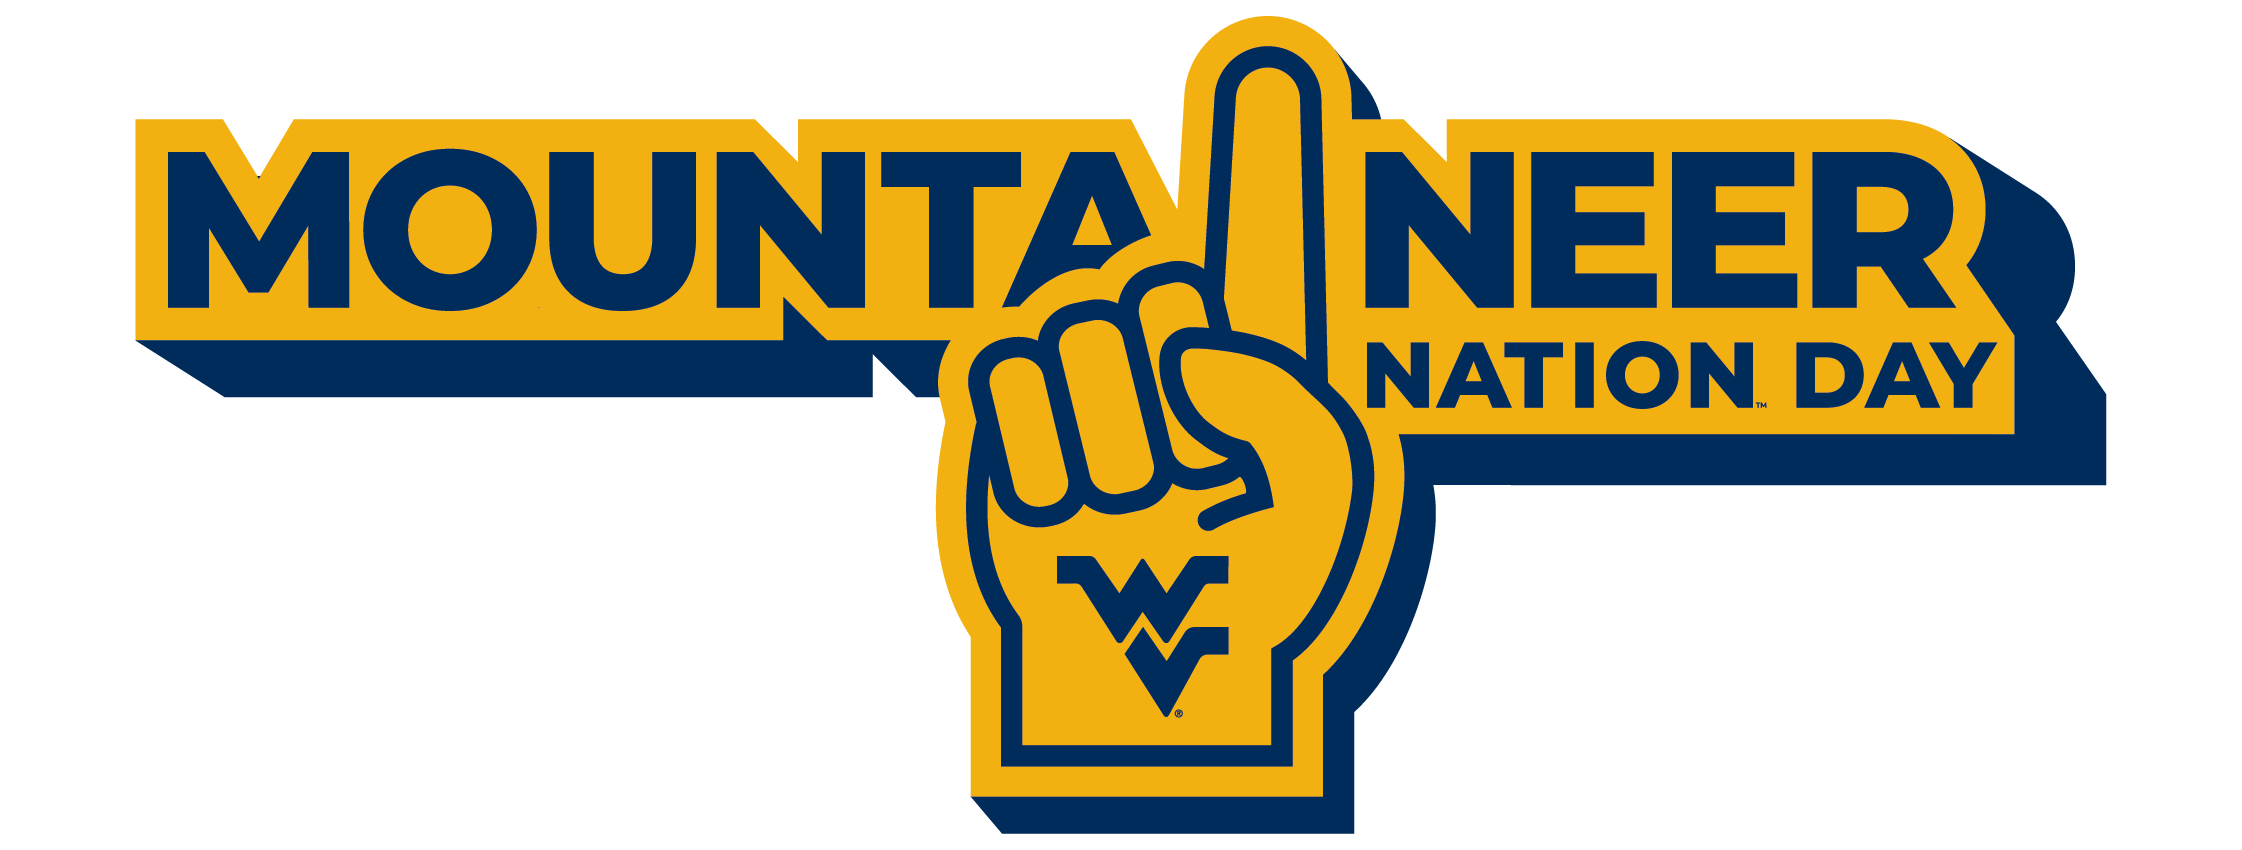 Mountaineer Nation Day